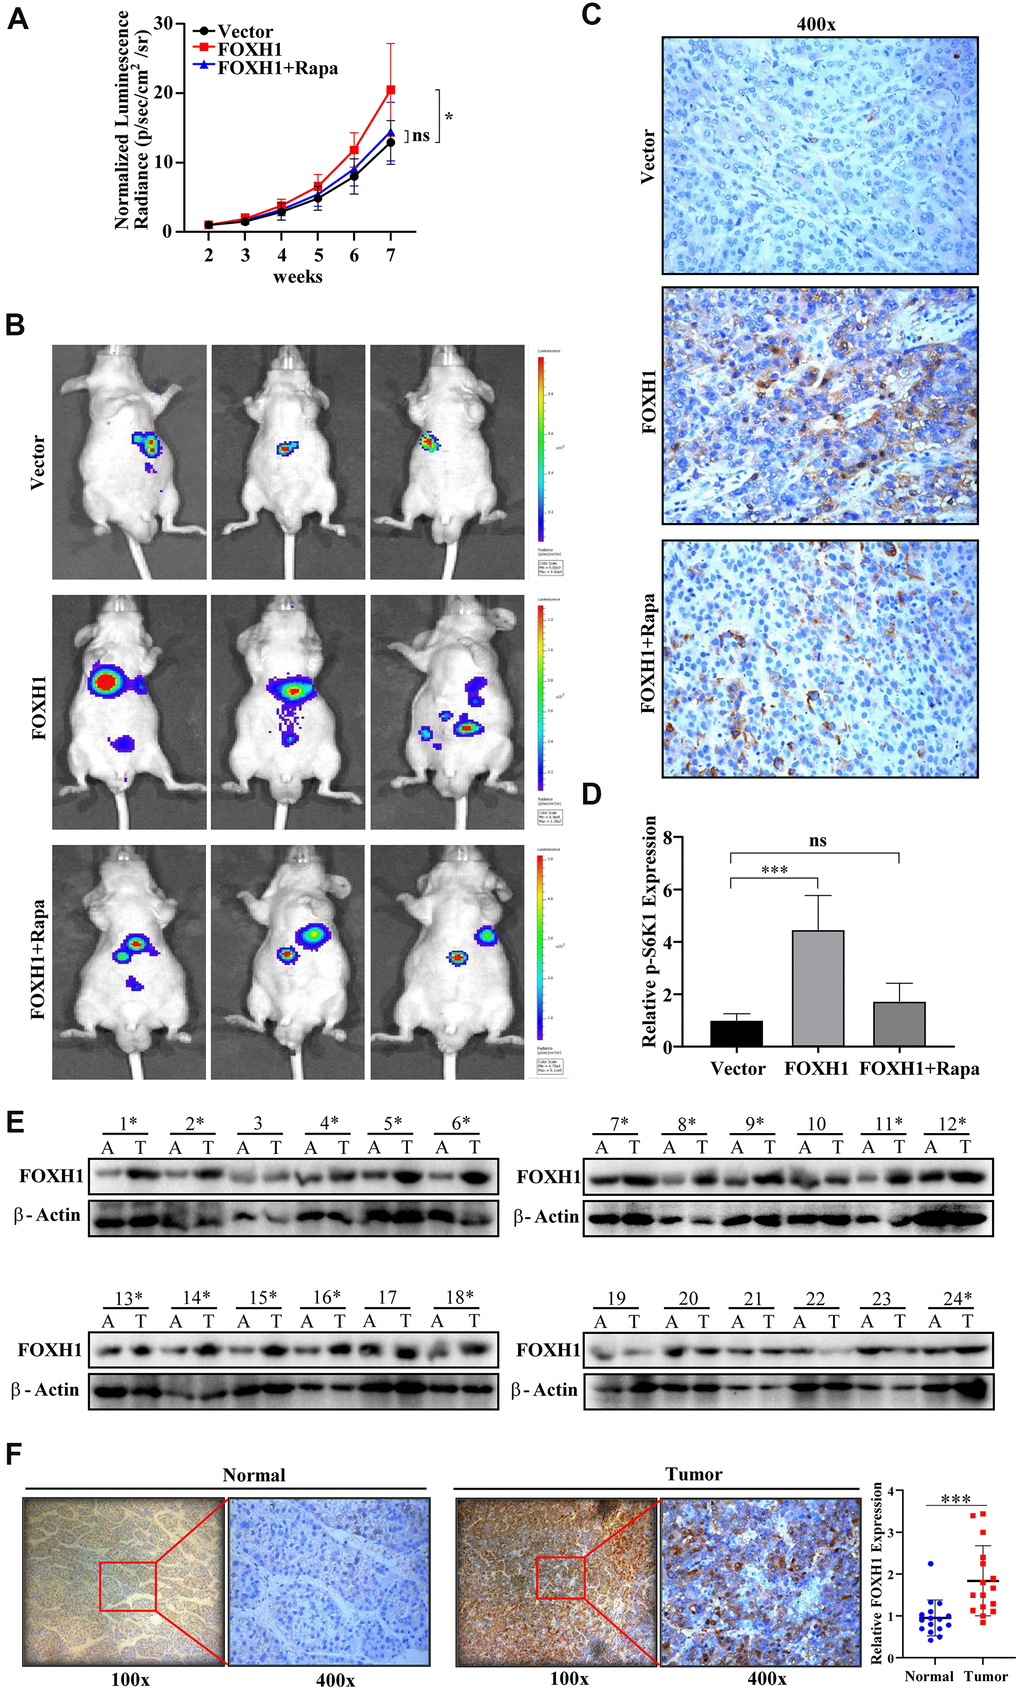 In vivo and clinical evidence confirmed the oncogenic role of FOXH1 in HCC development. (A) The HA22T tumor growth curve. (B) Representative images of HA22T tumors. (C) p-S6K1 staining showed that FOXH1 promoted HA22T tumor growth was dependent of mTOR activation. (D) A statistical analysis of p-S6K1 level. (E) Western blotting analysis of FOXH1 in 24 HCC samples with their paired adjacent liver tissues. (F) IHC staining of FOXH1 in HCC samples using their corresponding adjacent liver tissues as controls. Left, representative image of FOXH1 staining in slides made from patient 1#. Right, statistical analysis of FOXH1 staining. Scale bar: 25 μm. *P